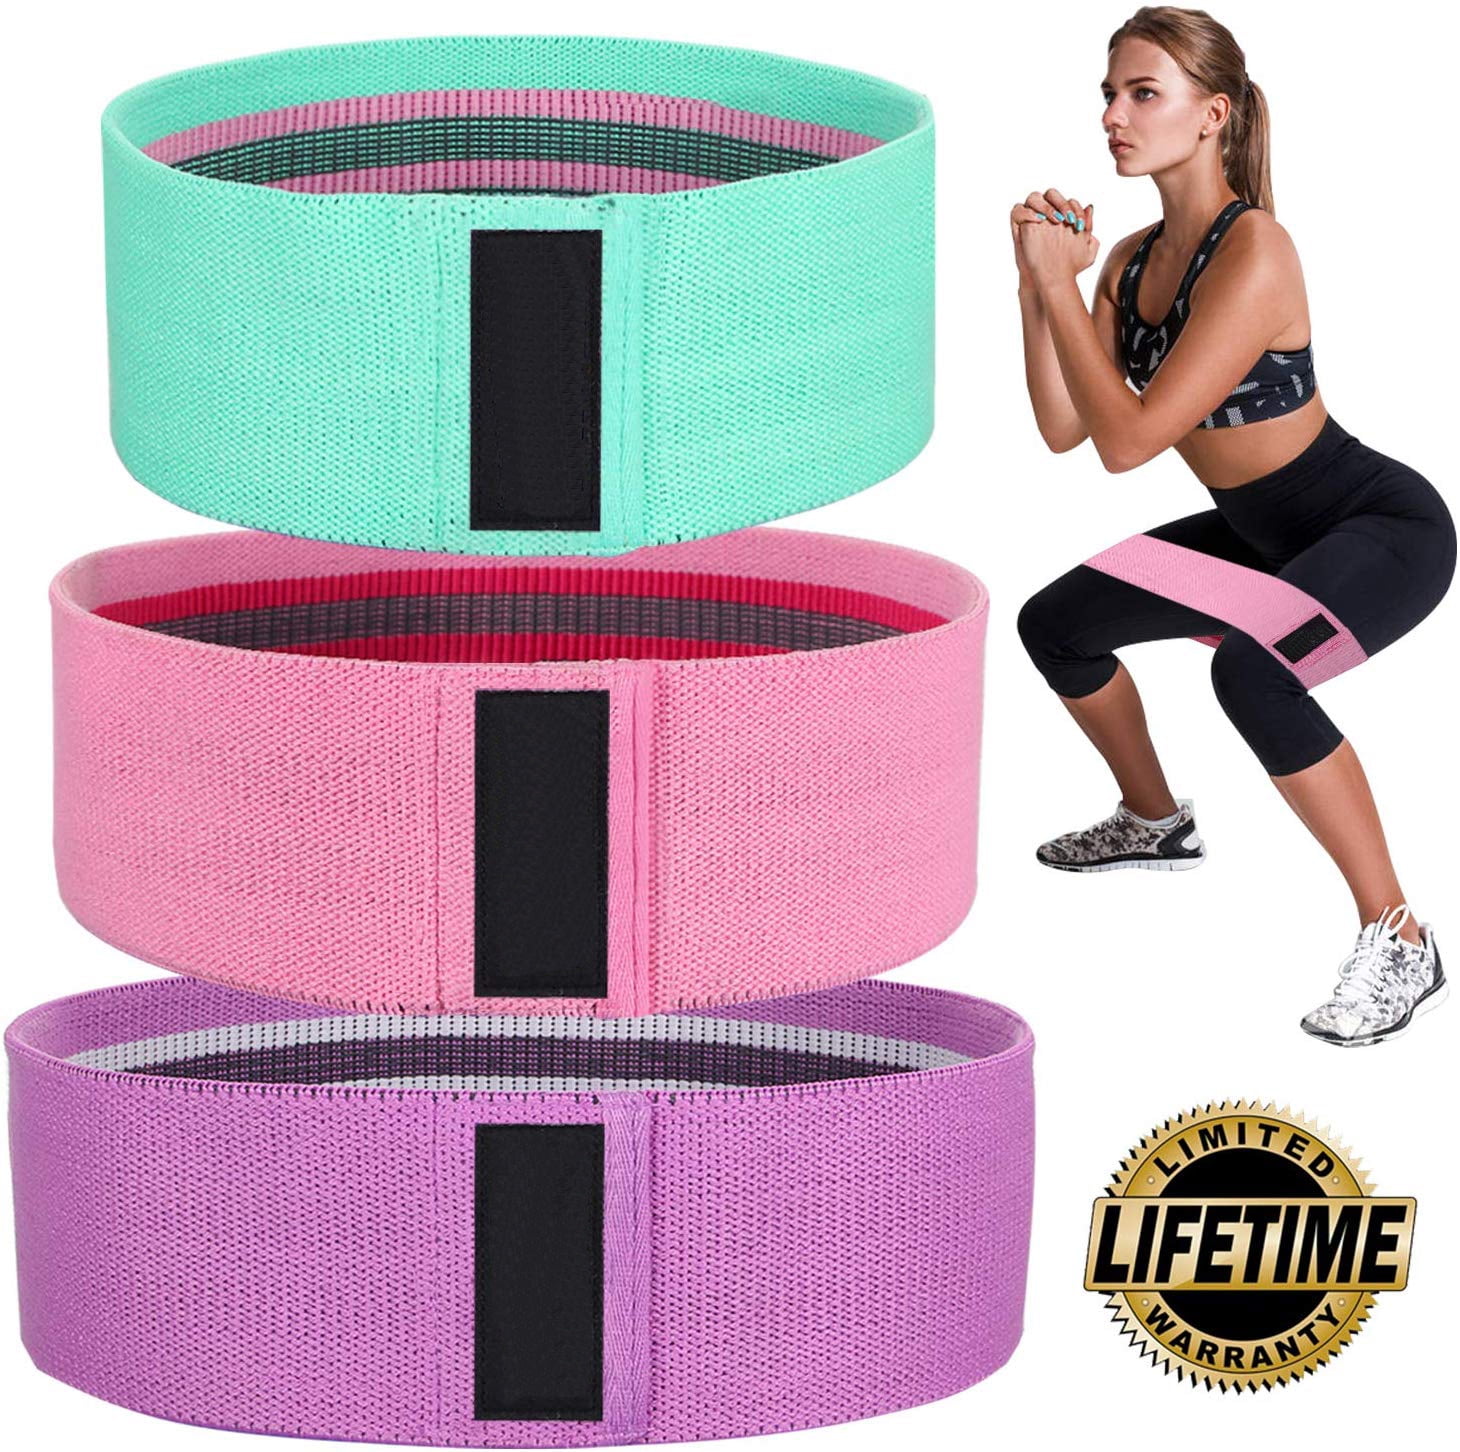 DEAKIN FITNESS GLUTE HIP BAND SET ¦ OF 3 NON-SLIP RESISTANCE BANDS ¦... 